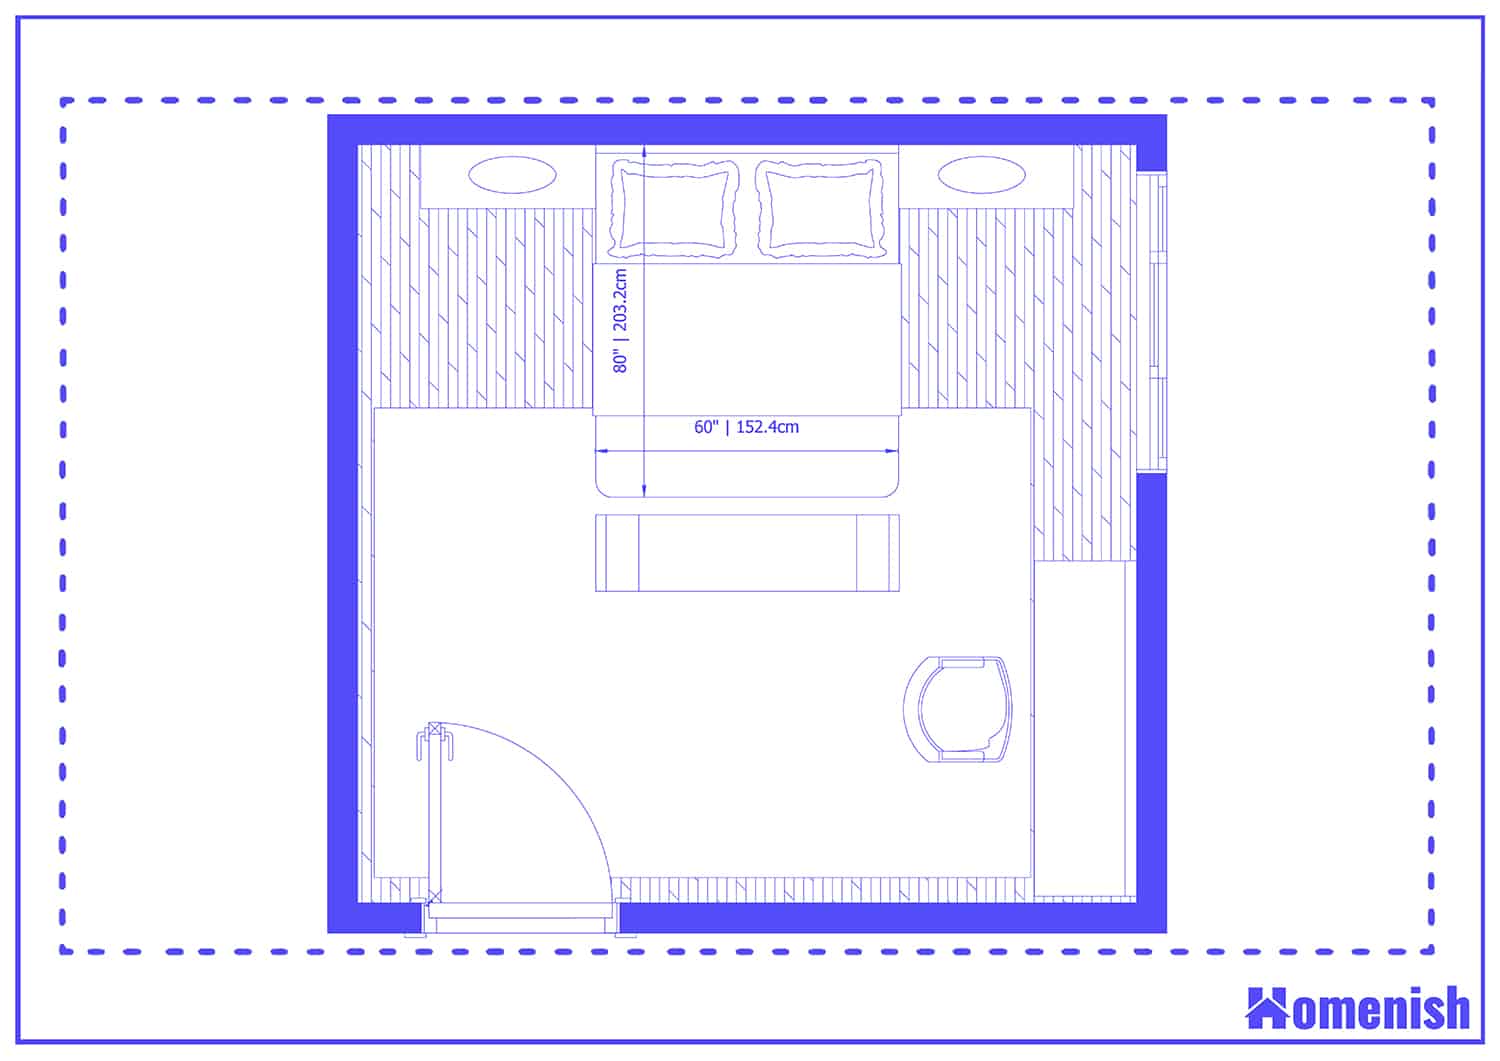 20 Bedroom with a Desk Layouts with Floor Plans   Homenish